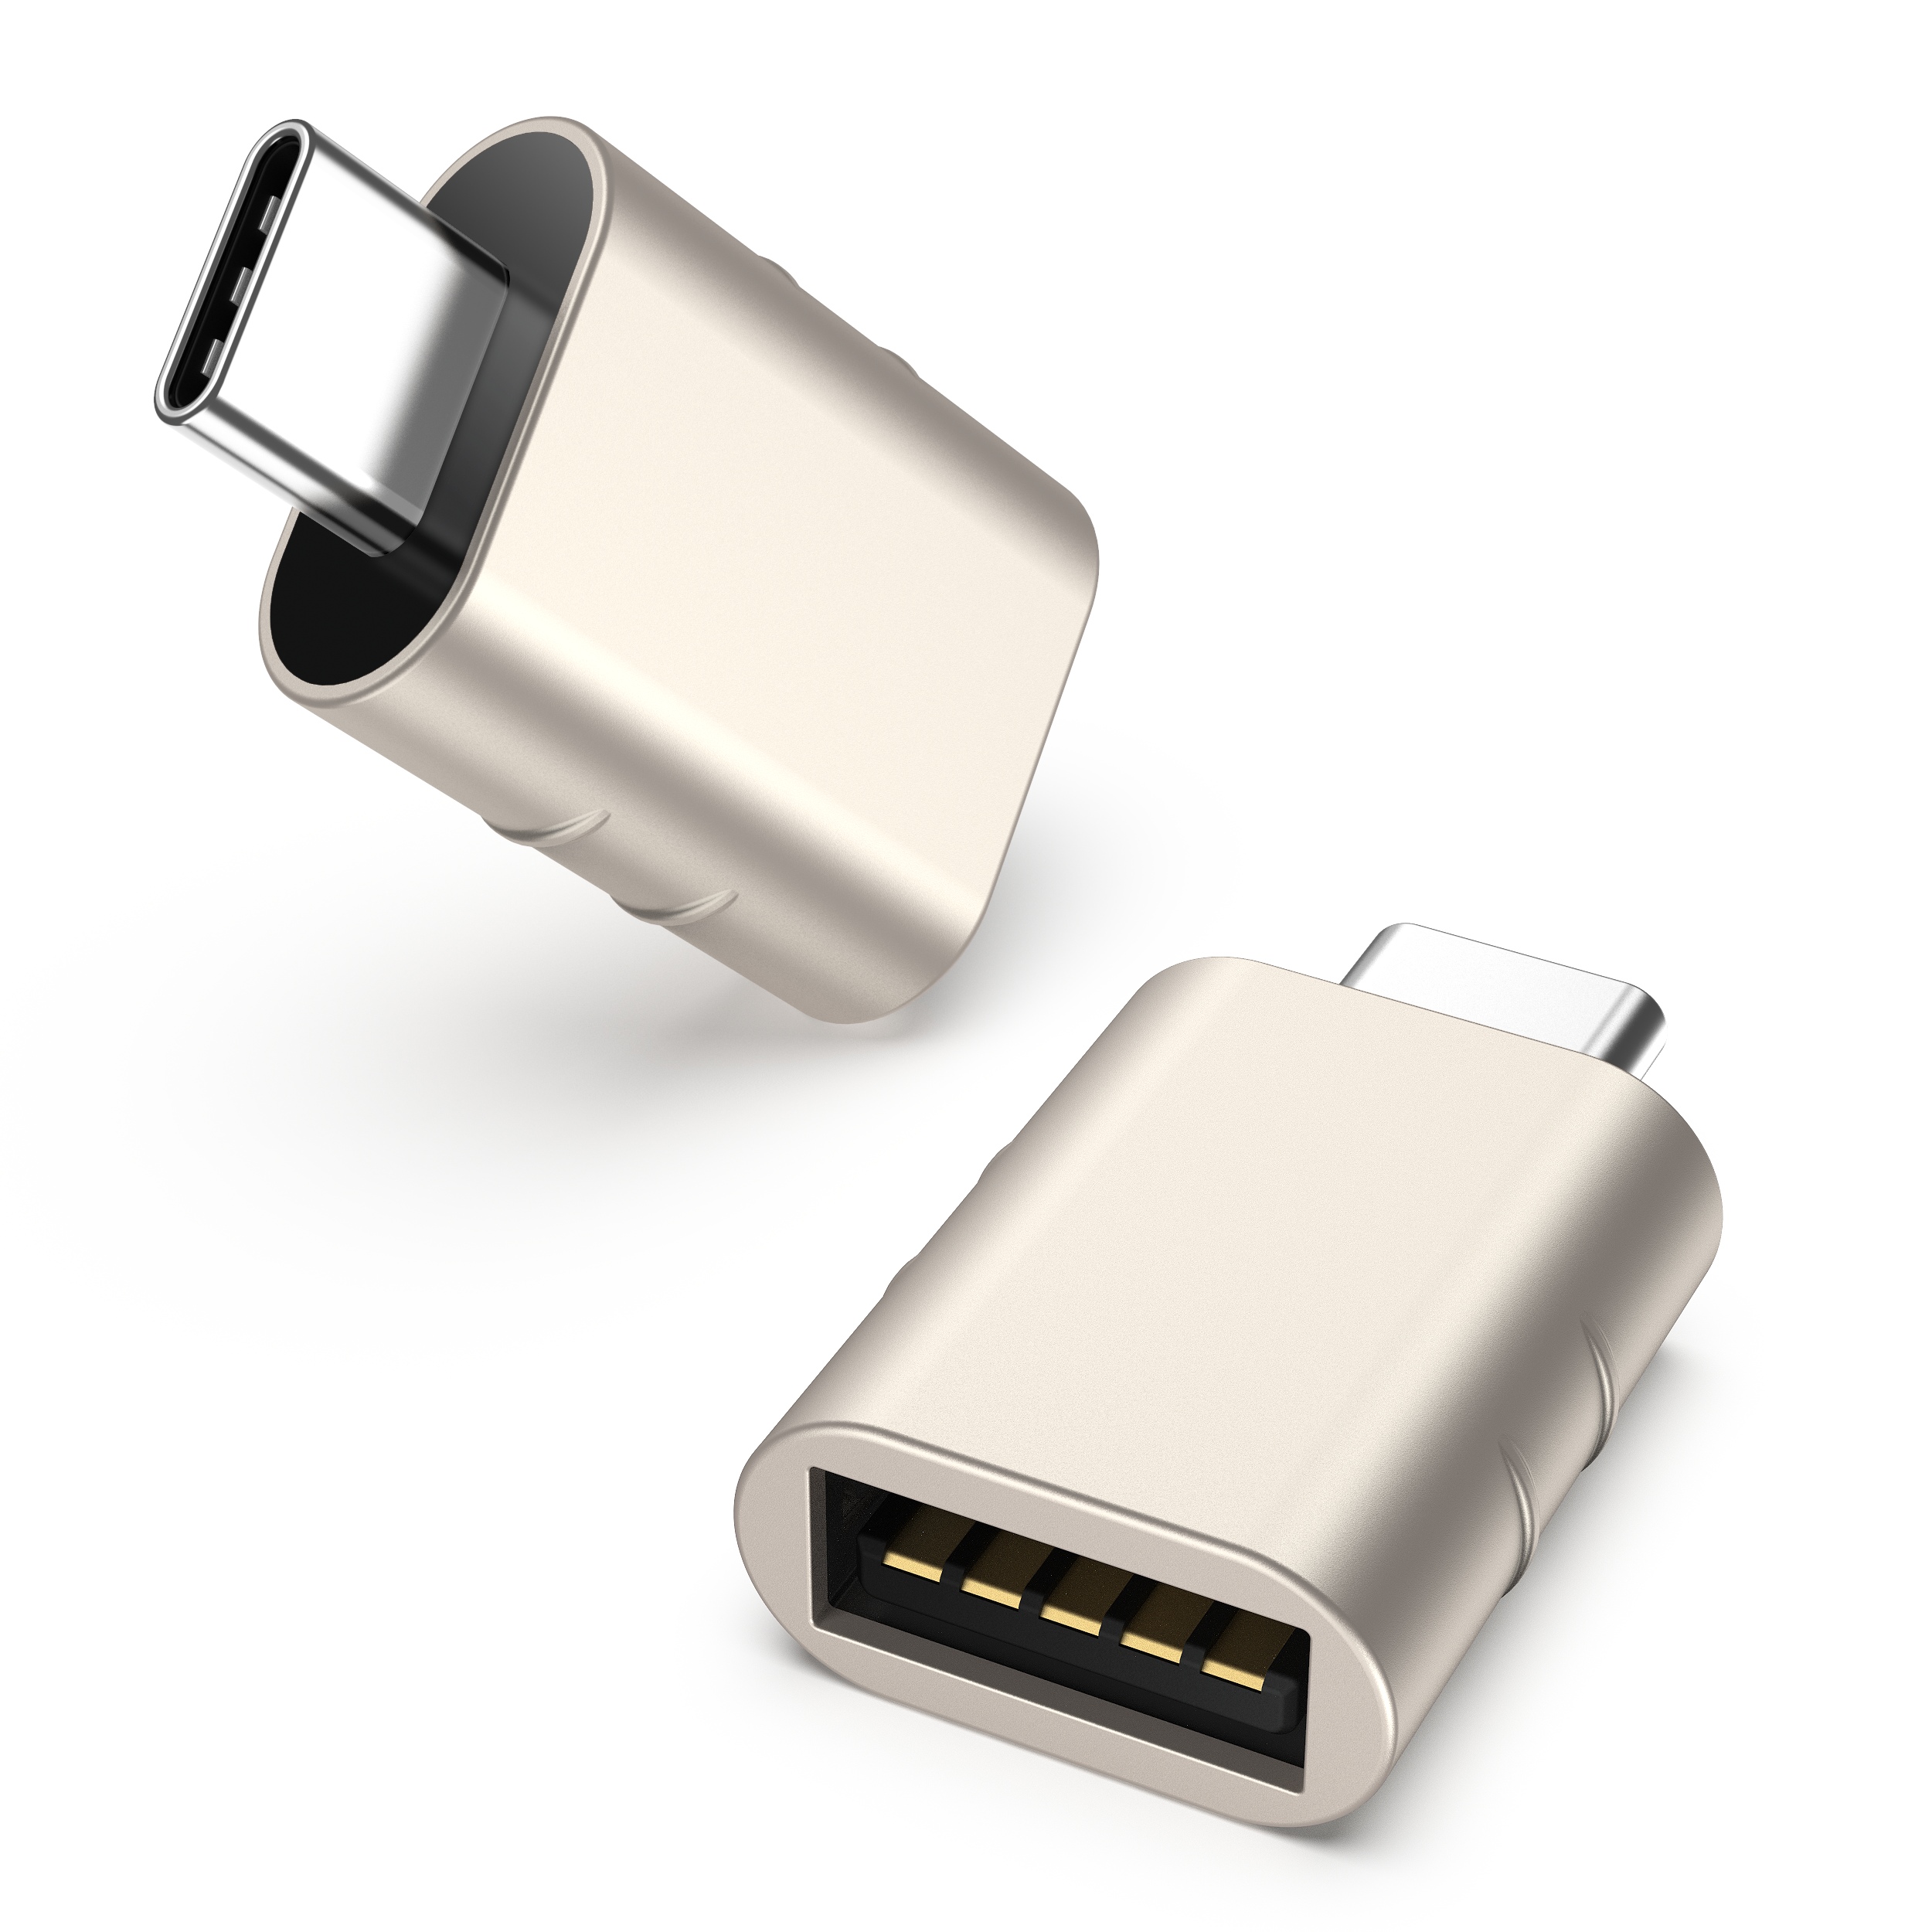 USB C to USB Adapters 3.0 (2 PACK) 10-in-1 Bundle